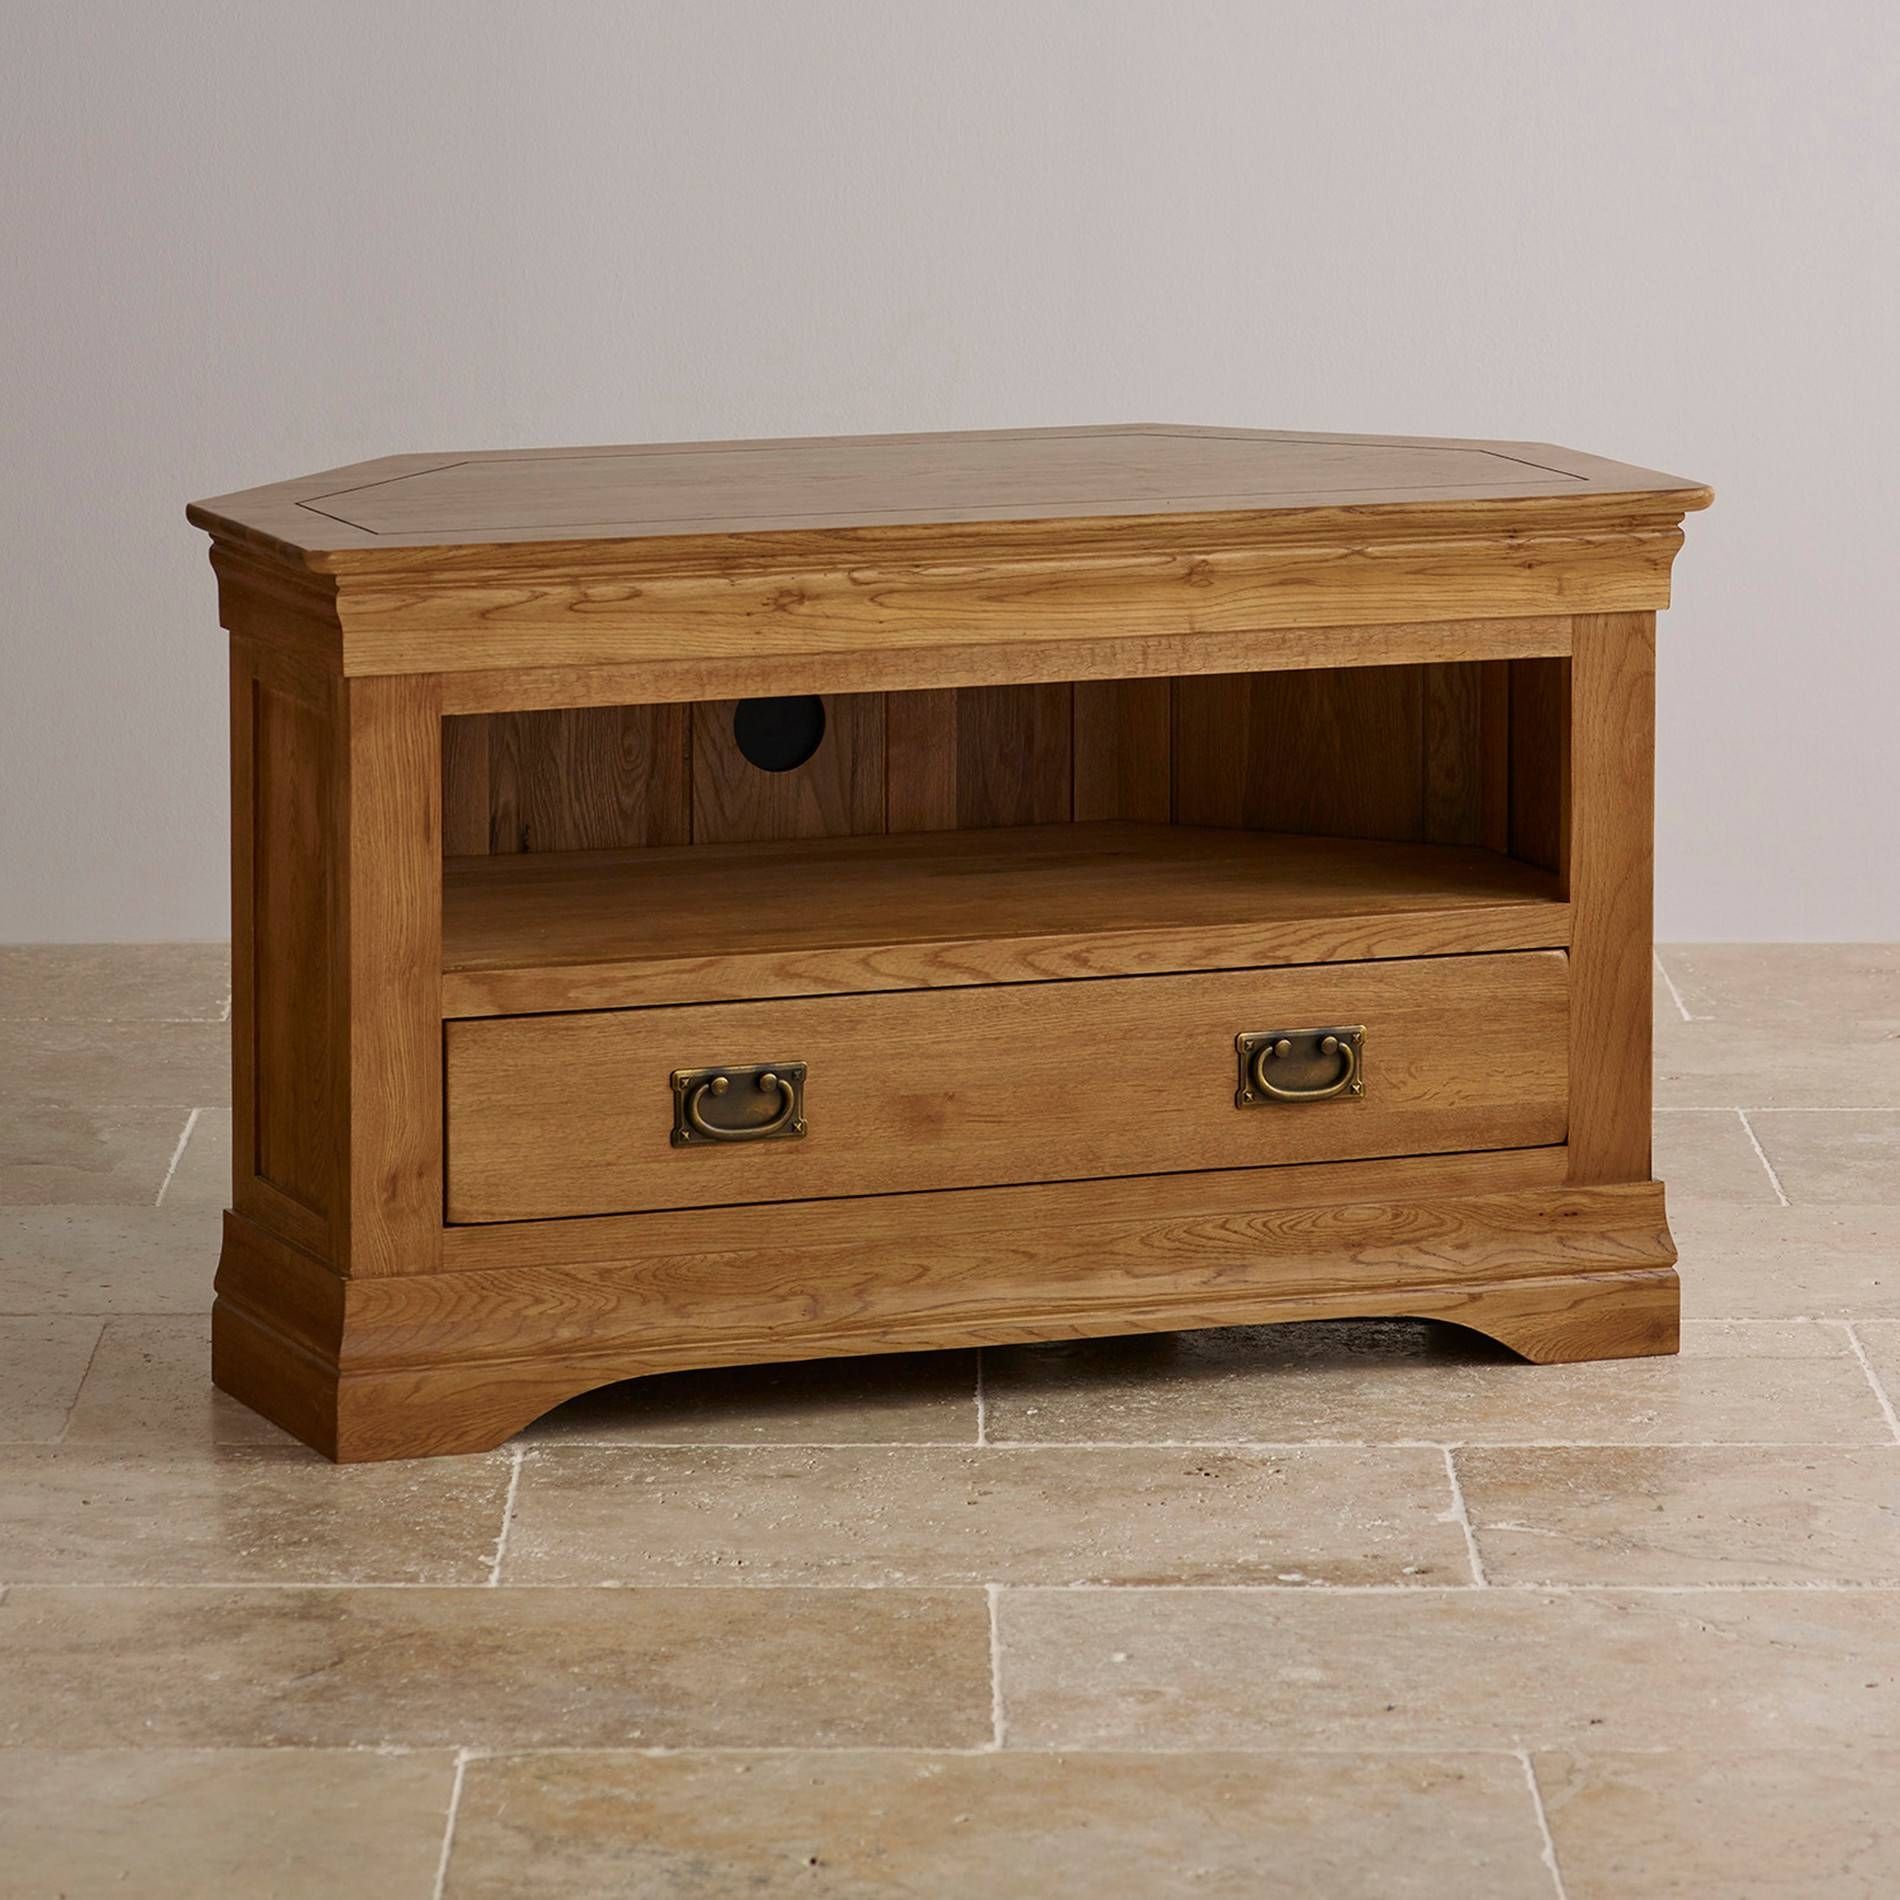 French Farmhouse Corner Tv Unit | Solid Oak | Oak Furniture Land Throughout Rustic Wood Tv Cabinets (View 4 of 15)